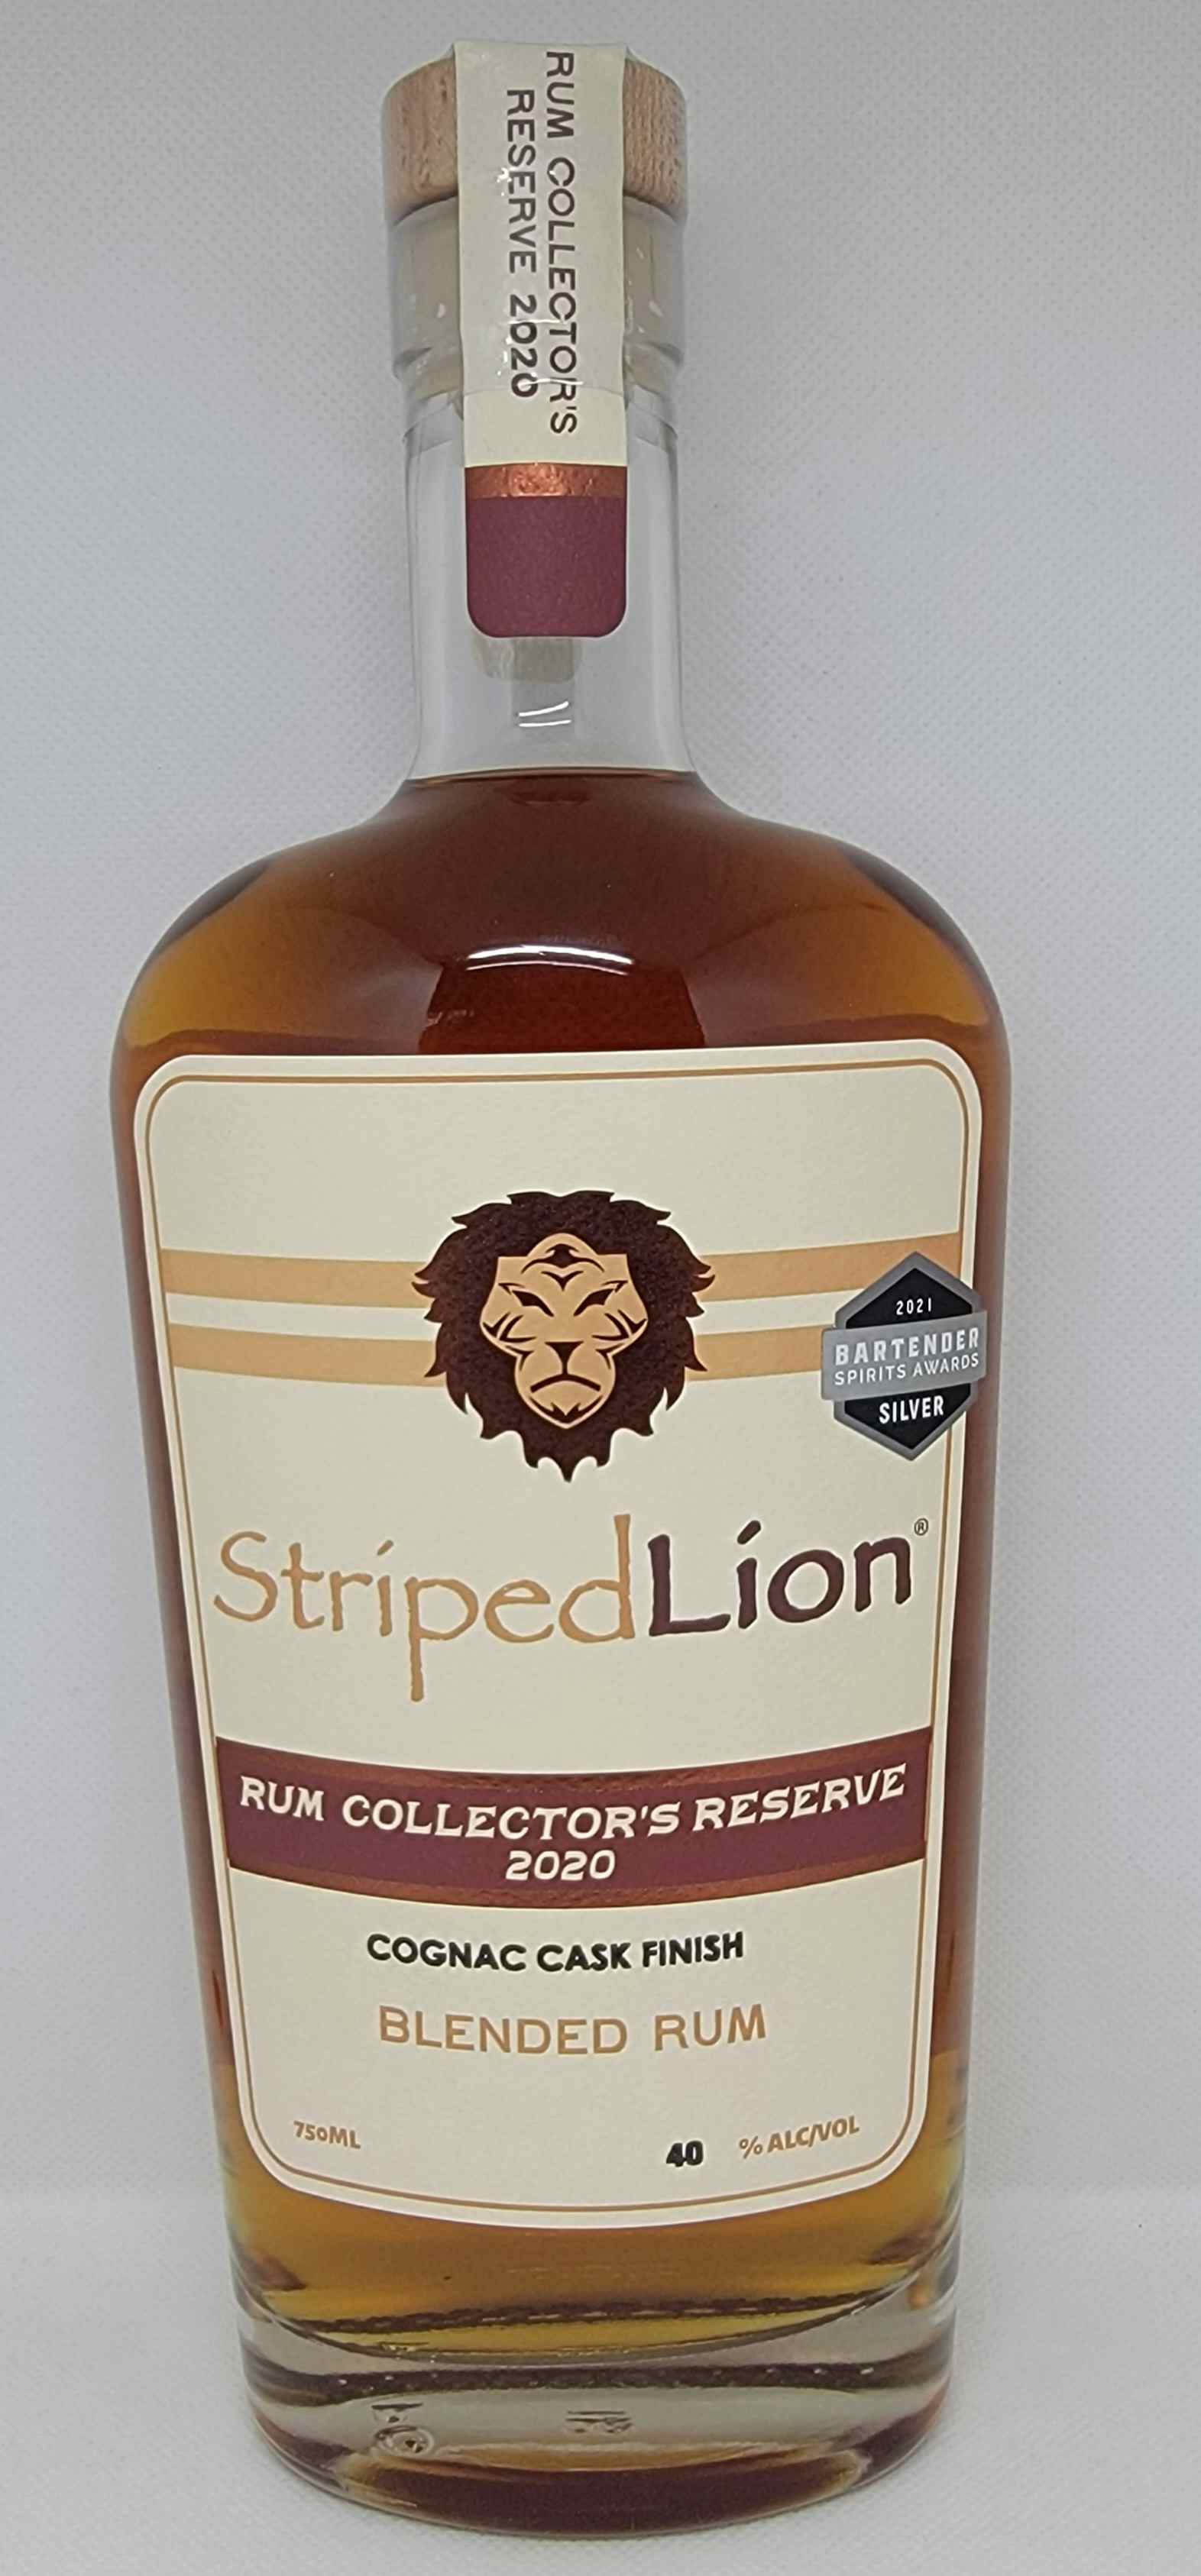 Striped Lion Rum Collector's Reserve 2020 Cognac Cask Finish Rum Price &  Reviews | Drizly